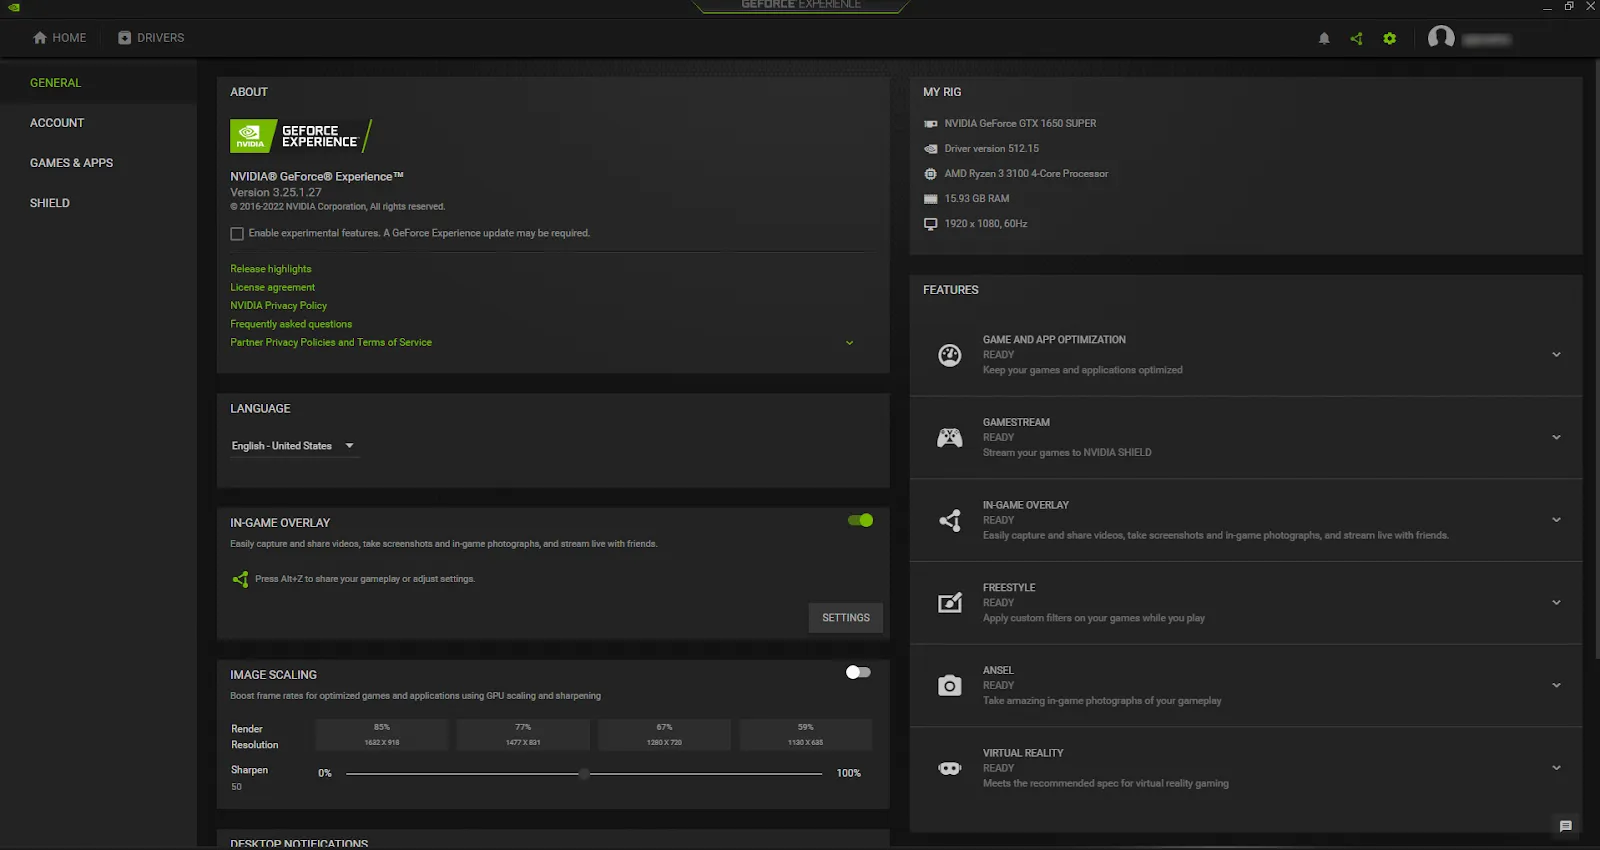 You'll need to register an Nvidia account before you start using this program.